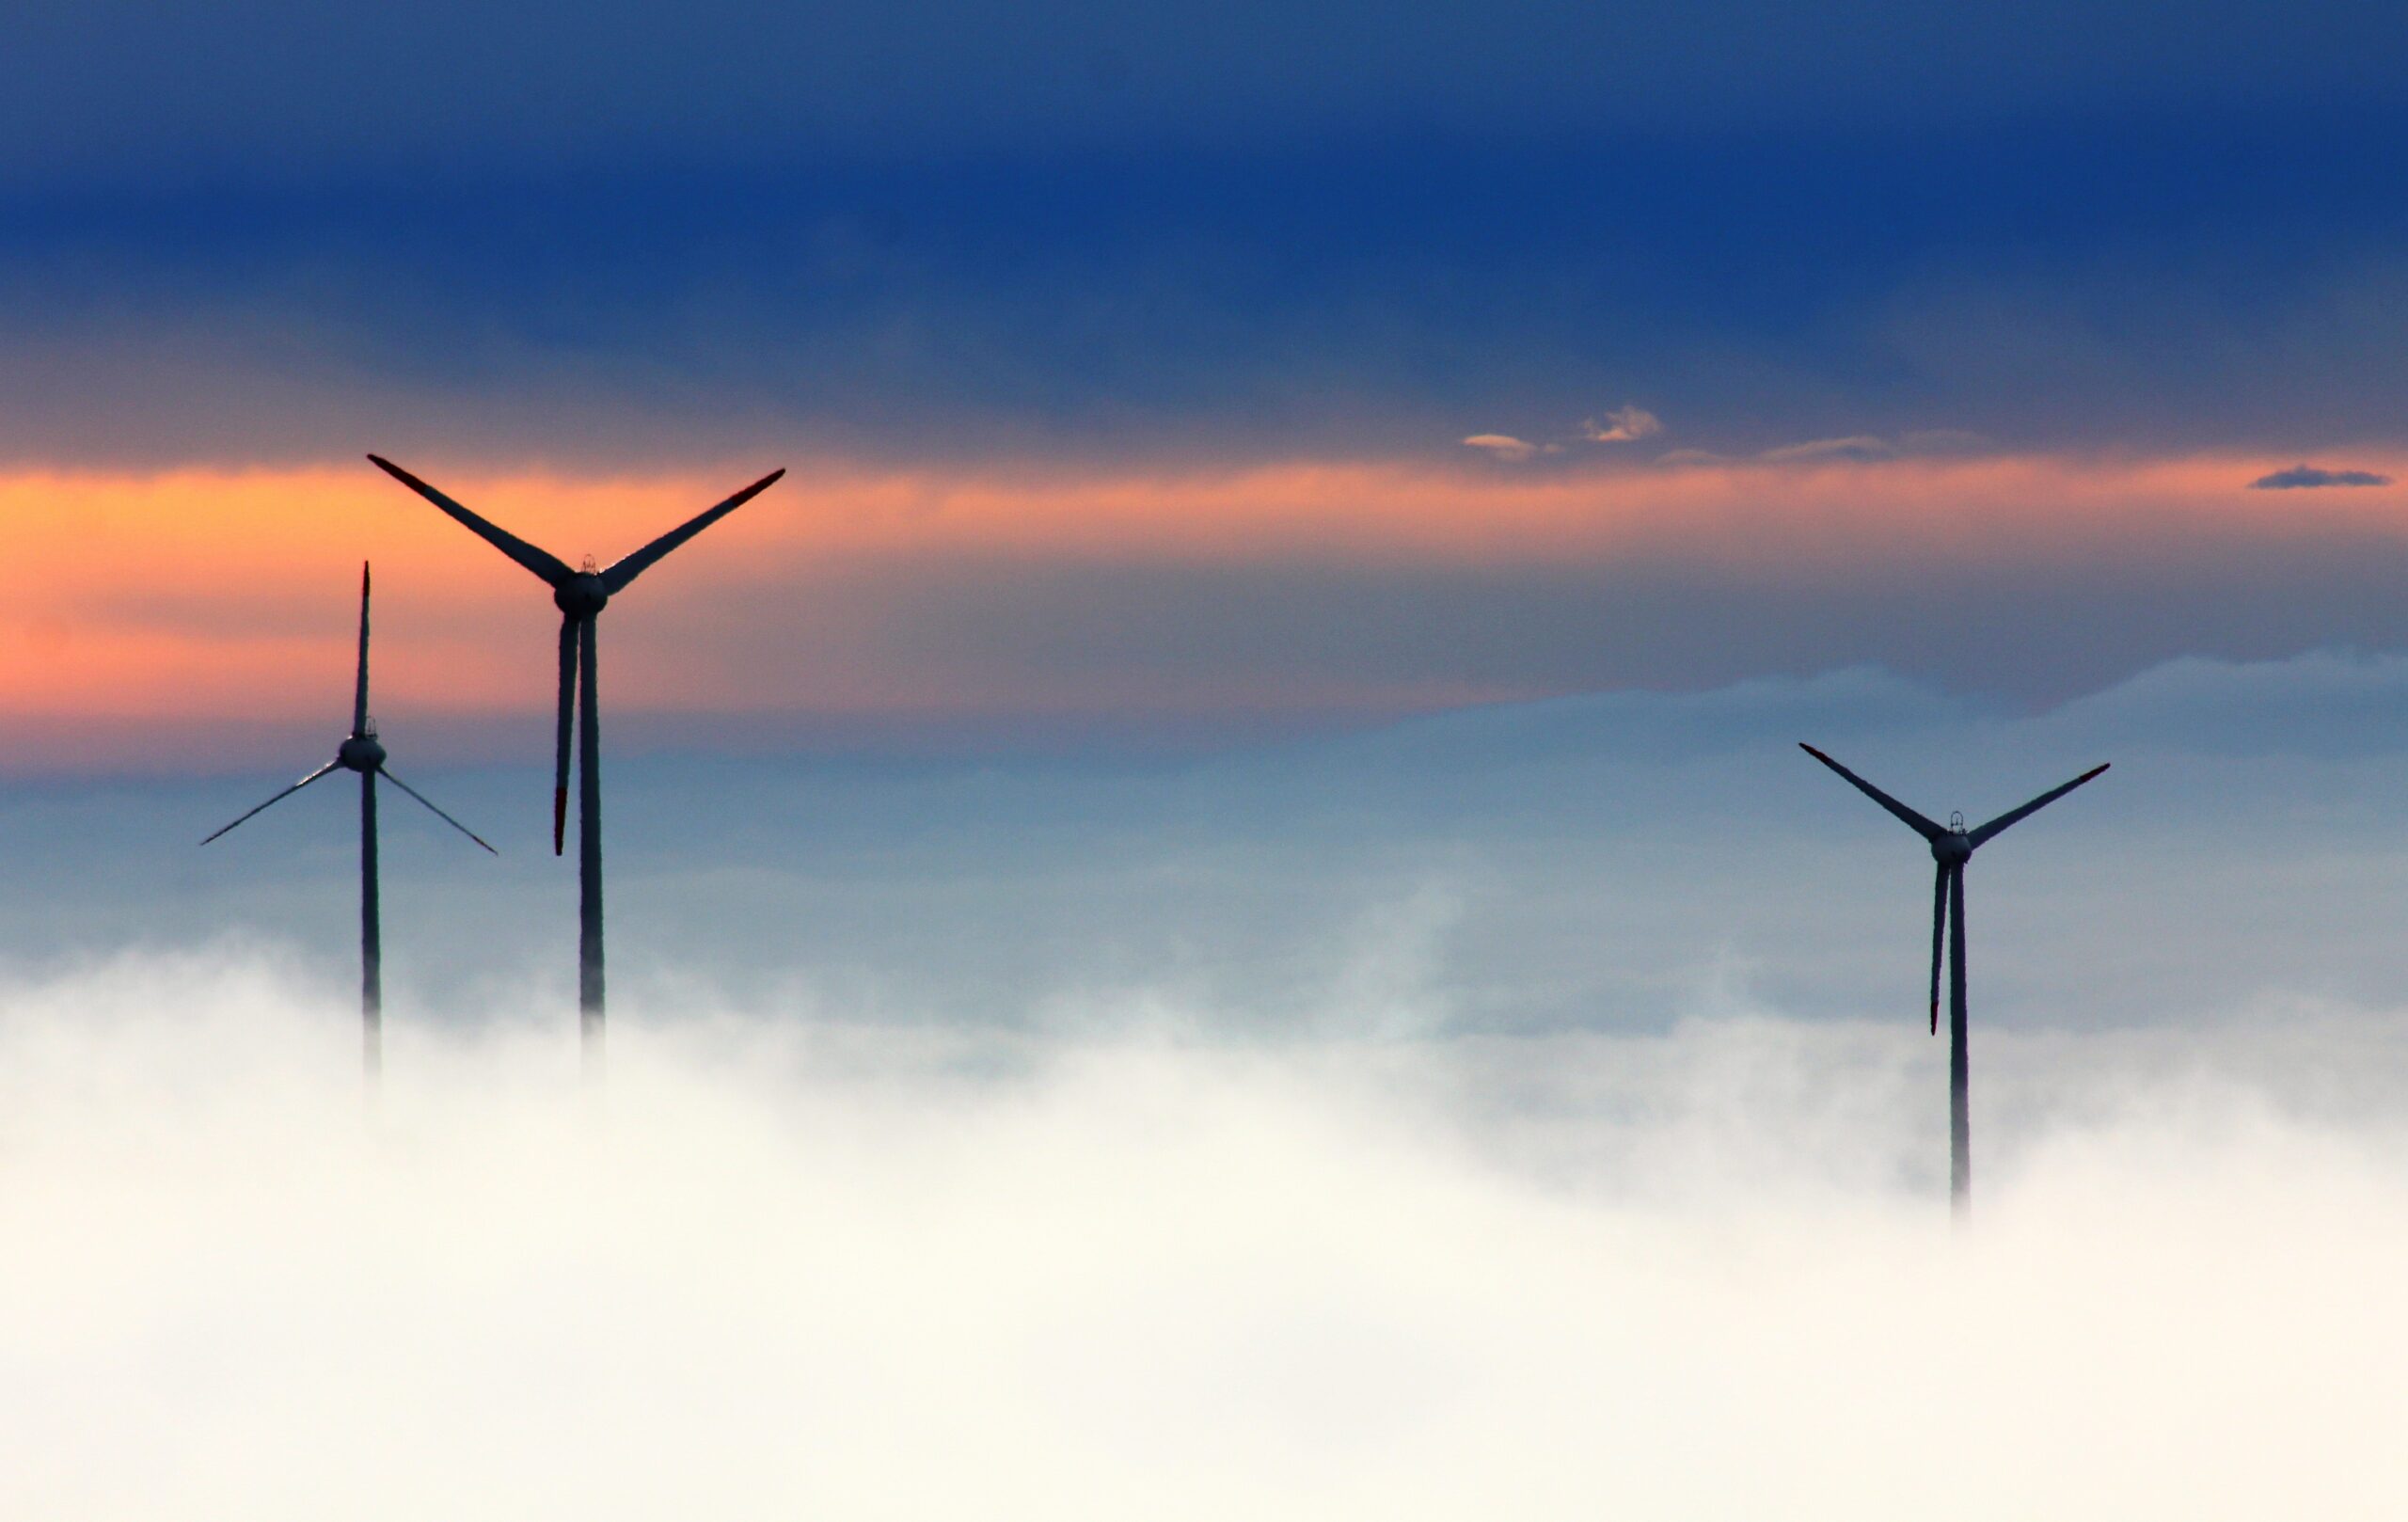 Wind turbines rising out of fog with horizon in background